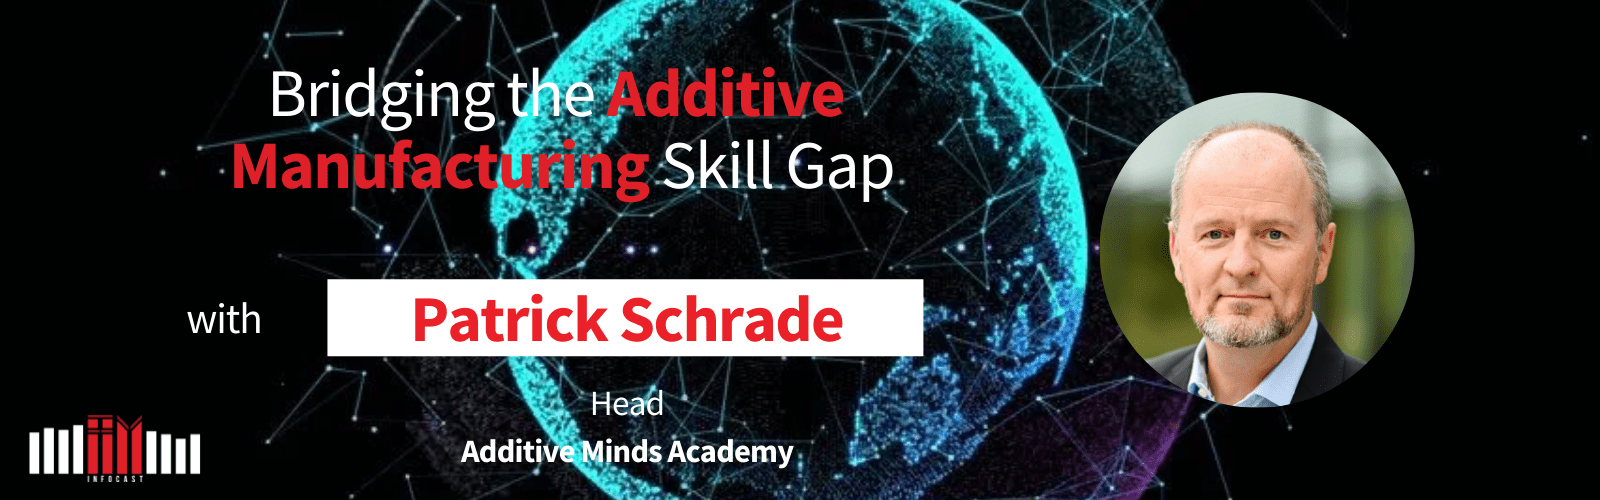 Bridging the Additive Manufacturing Skill Gap with Patrick Schrade